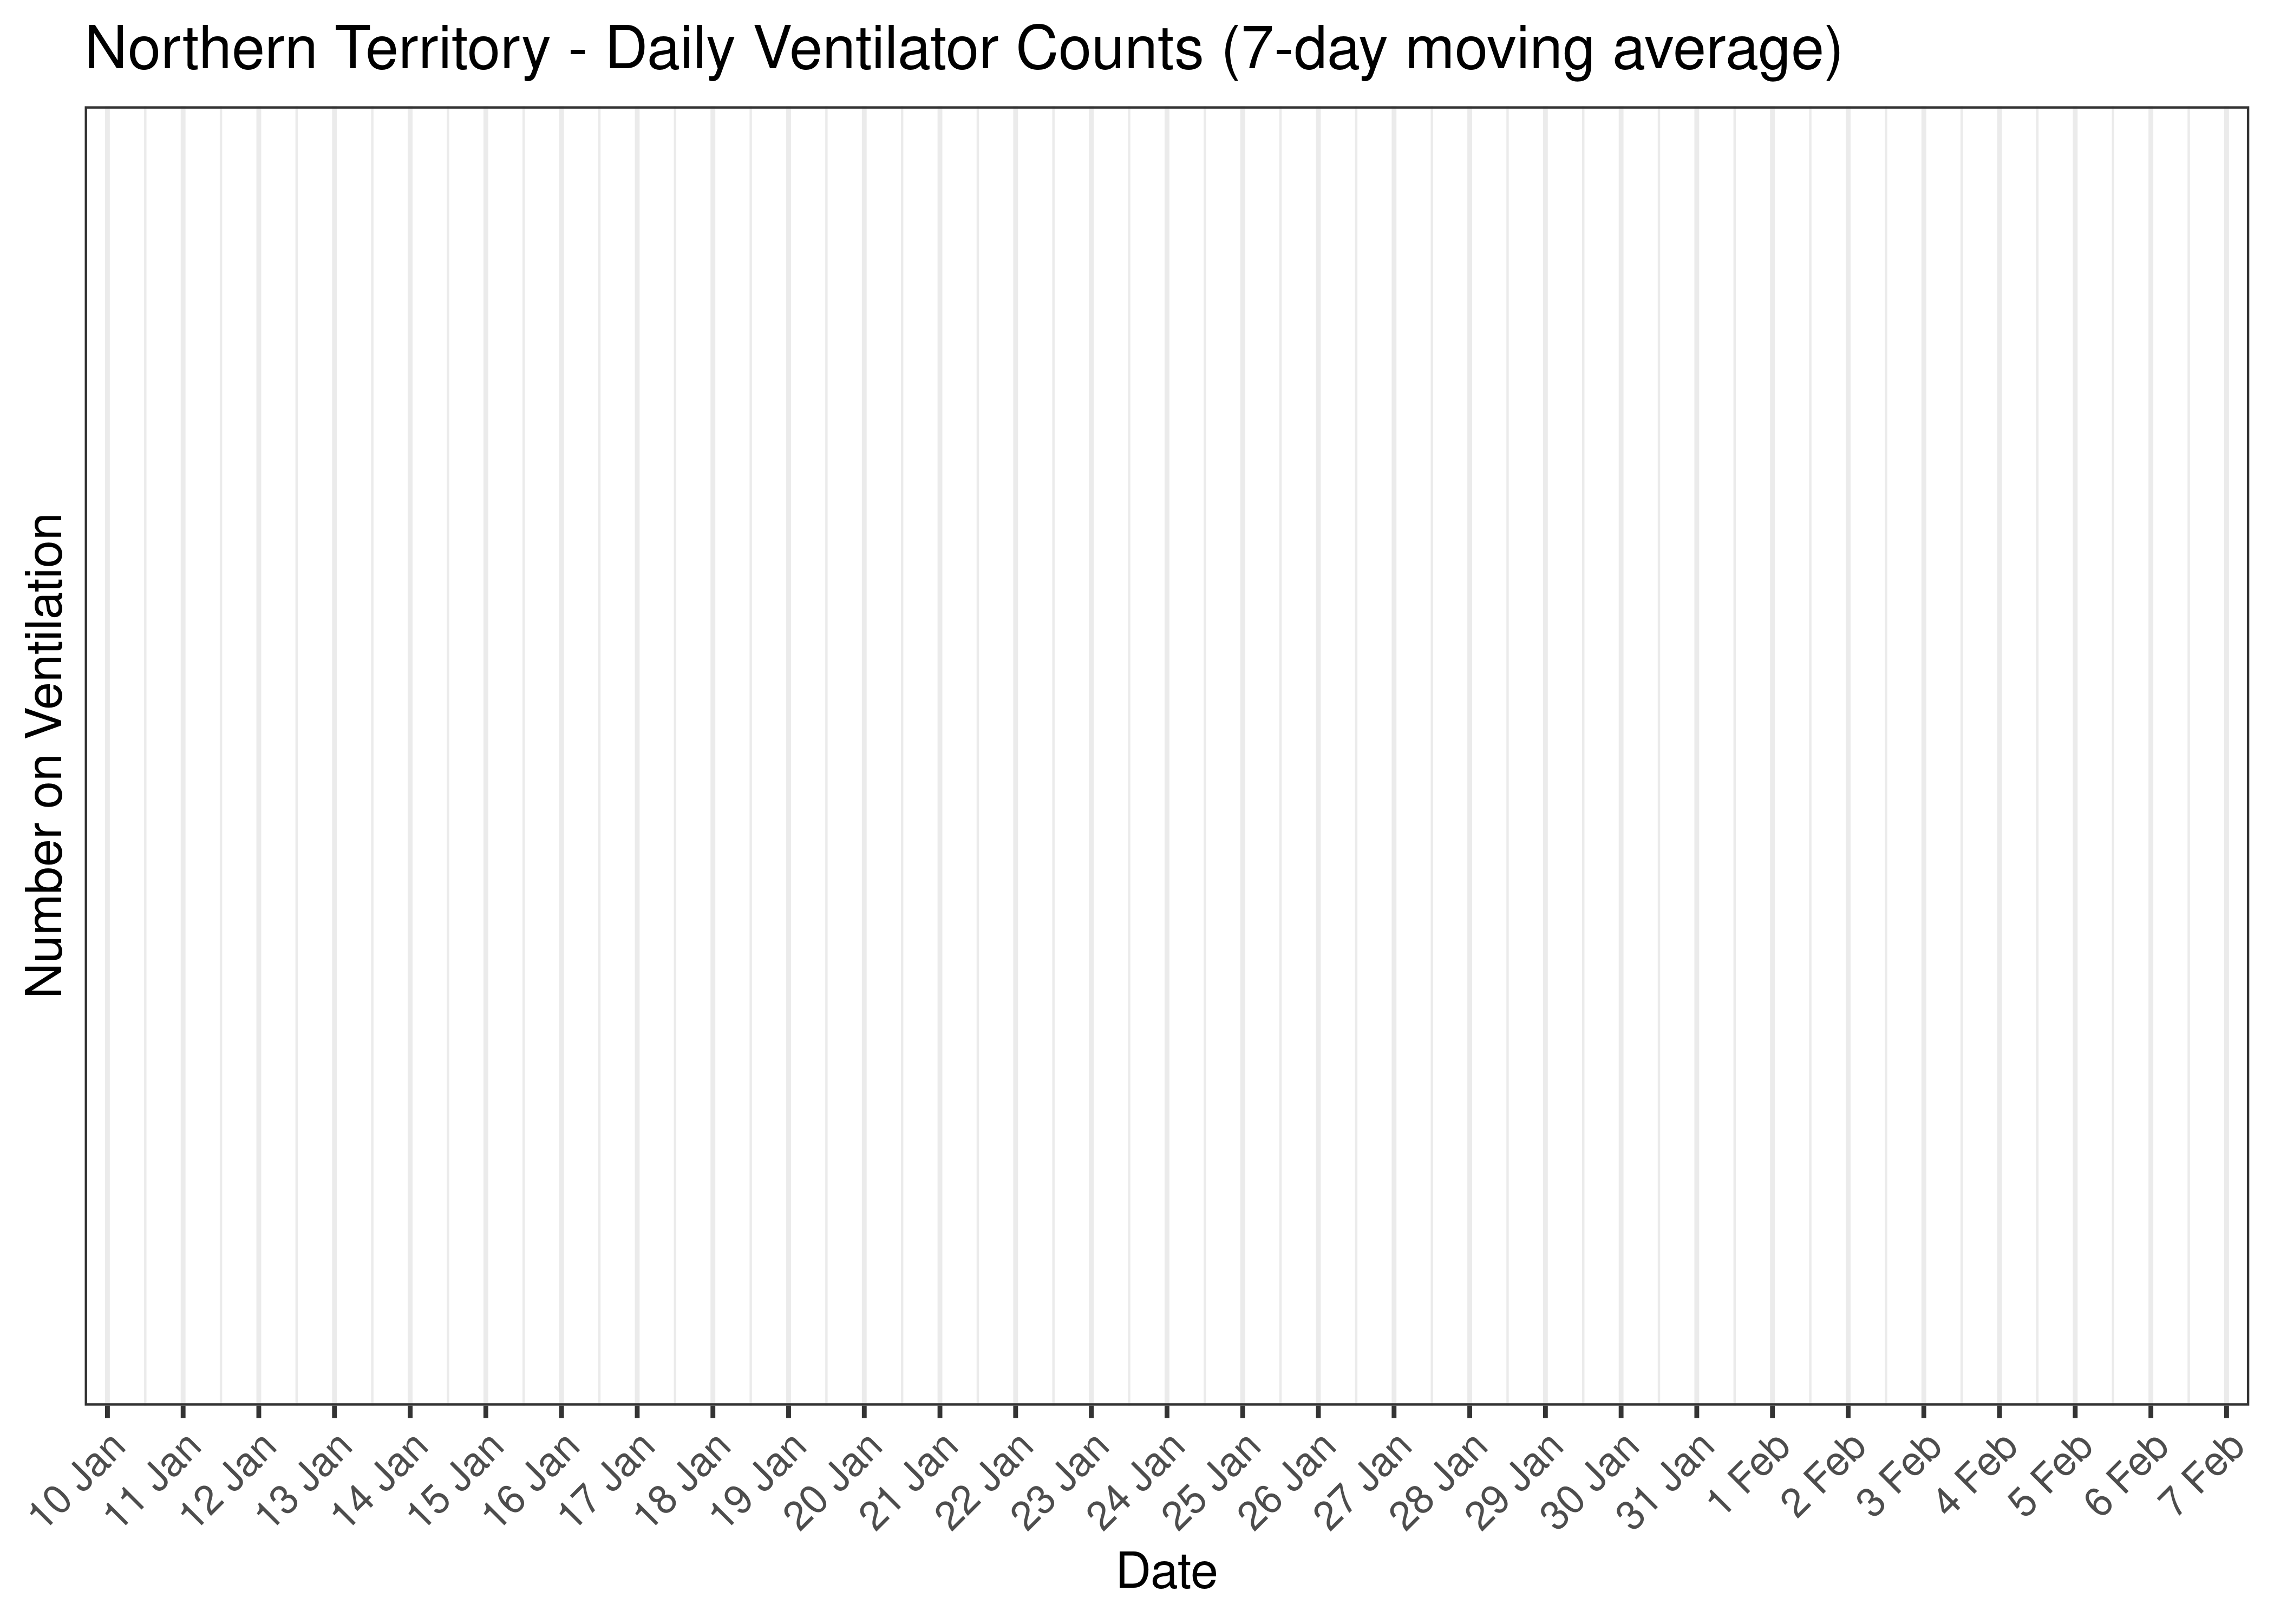 Northern Territory - Daily Ventilator Counts for Last 30-days (7-day moving average)